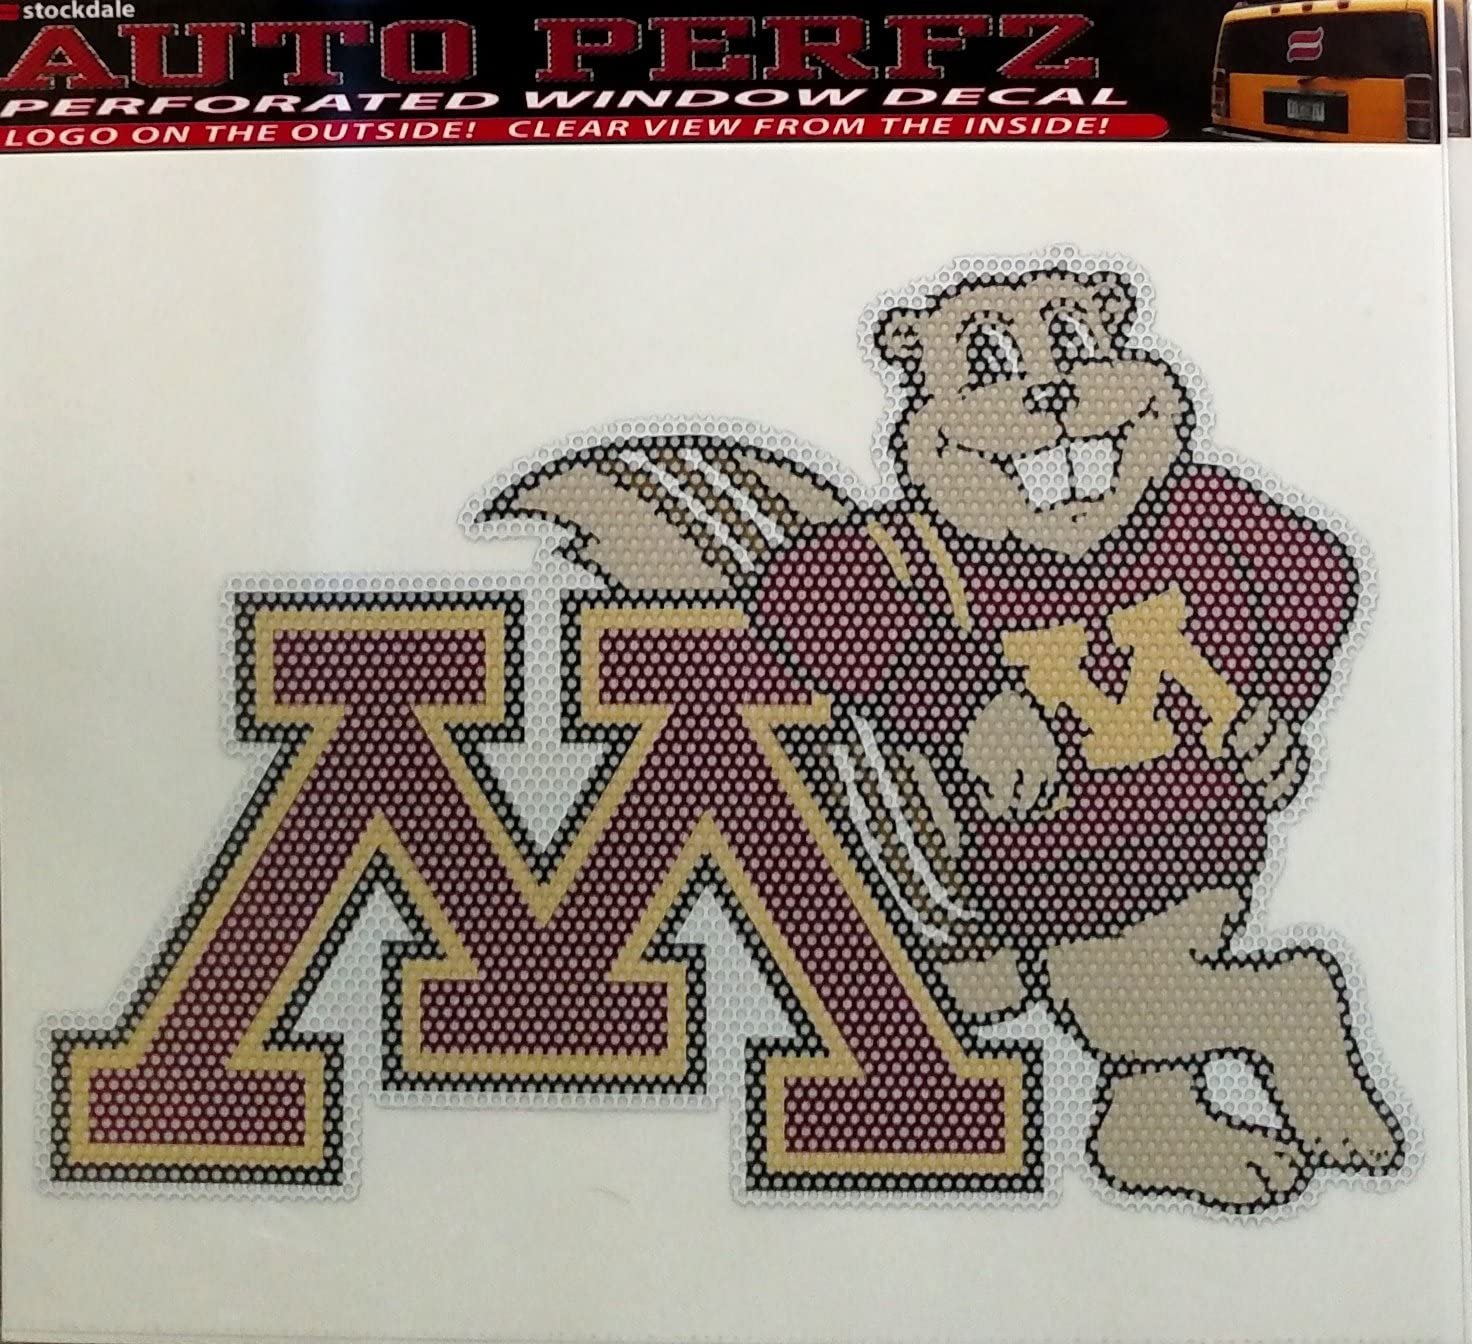 University of Minnesota Golden Gophers 8 Inch Preforated Window Film Decal Sticker, One-Way Vision, Adhesive Backing